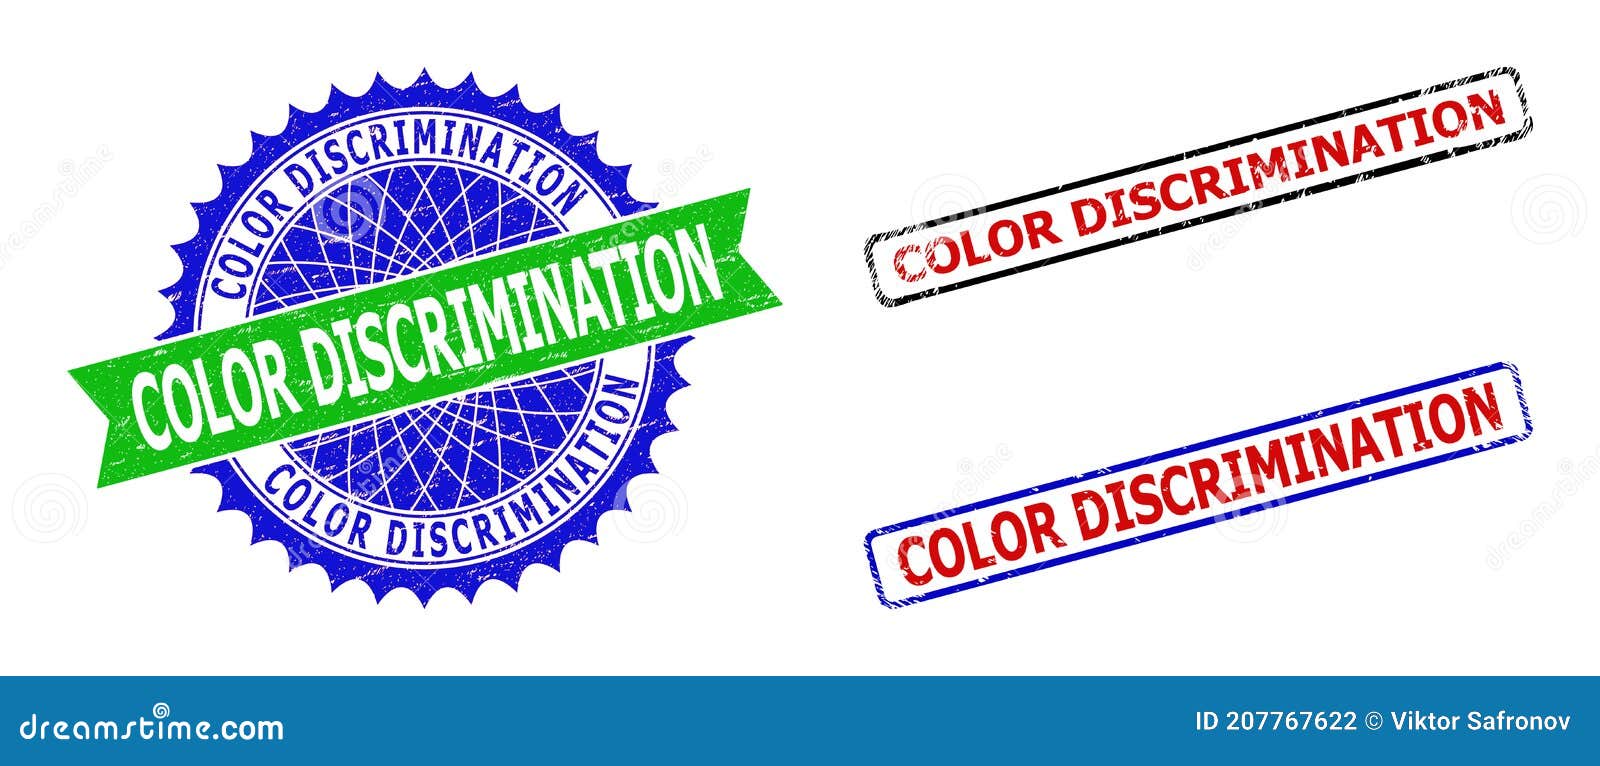 color discrimination rosette and rectangle bicolor stamps with corroded surfaces